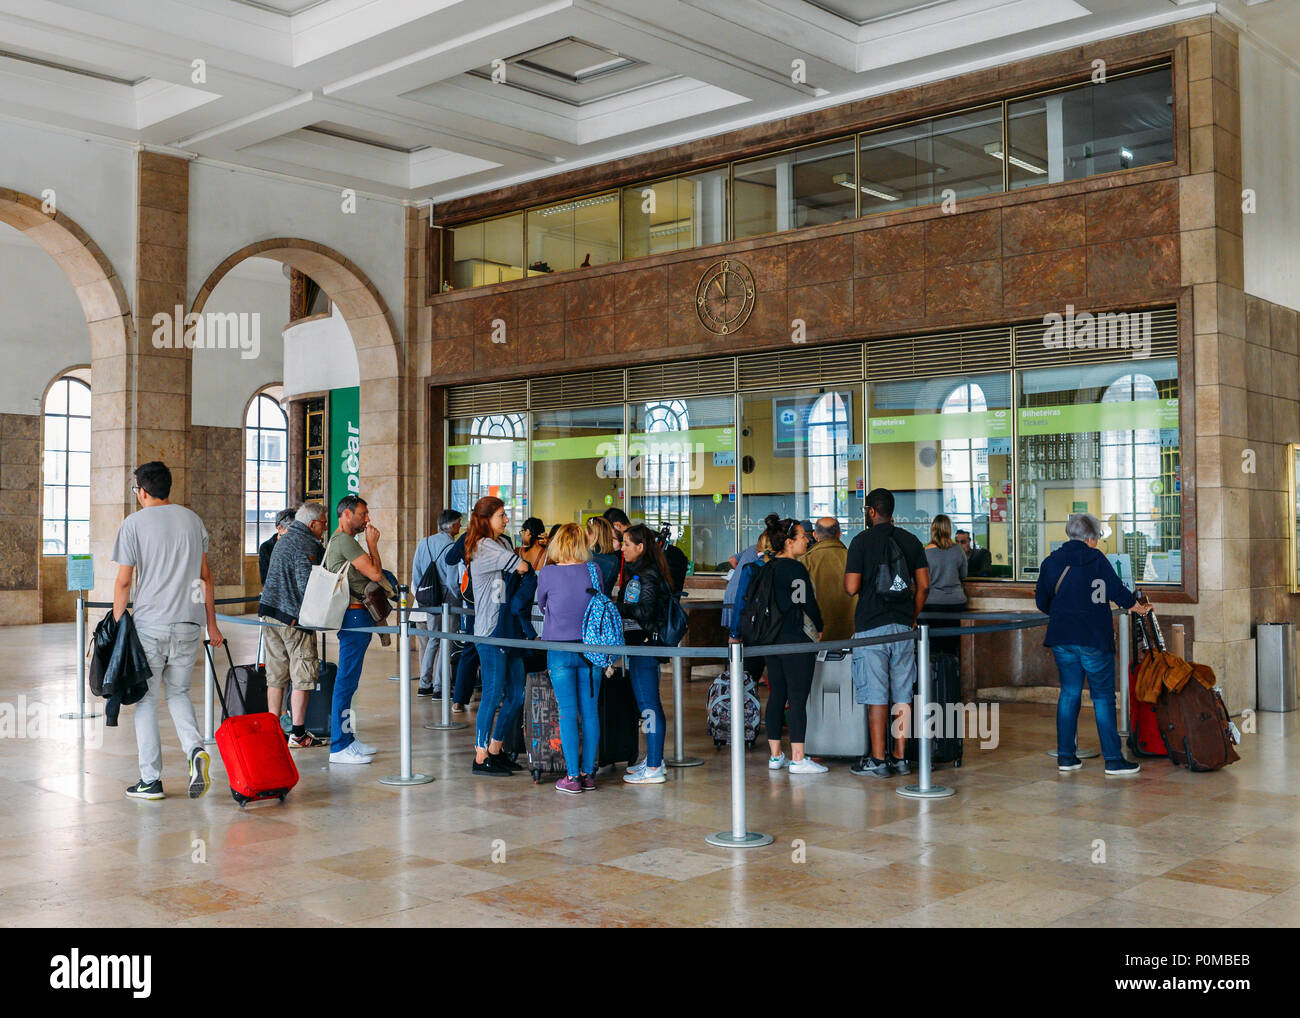 Passengers queue to purchase tickets at Lisbon's Santa Apolonia train station connecting Portugal's inter-city train network is accessible Stock Photo